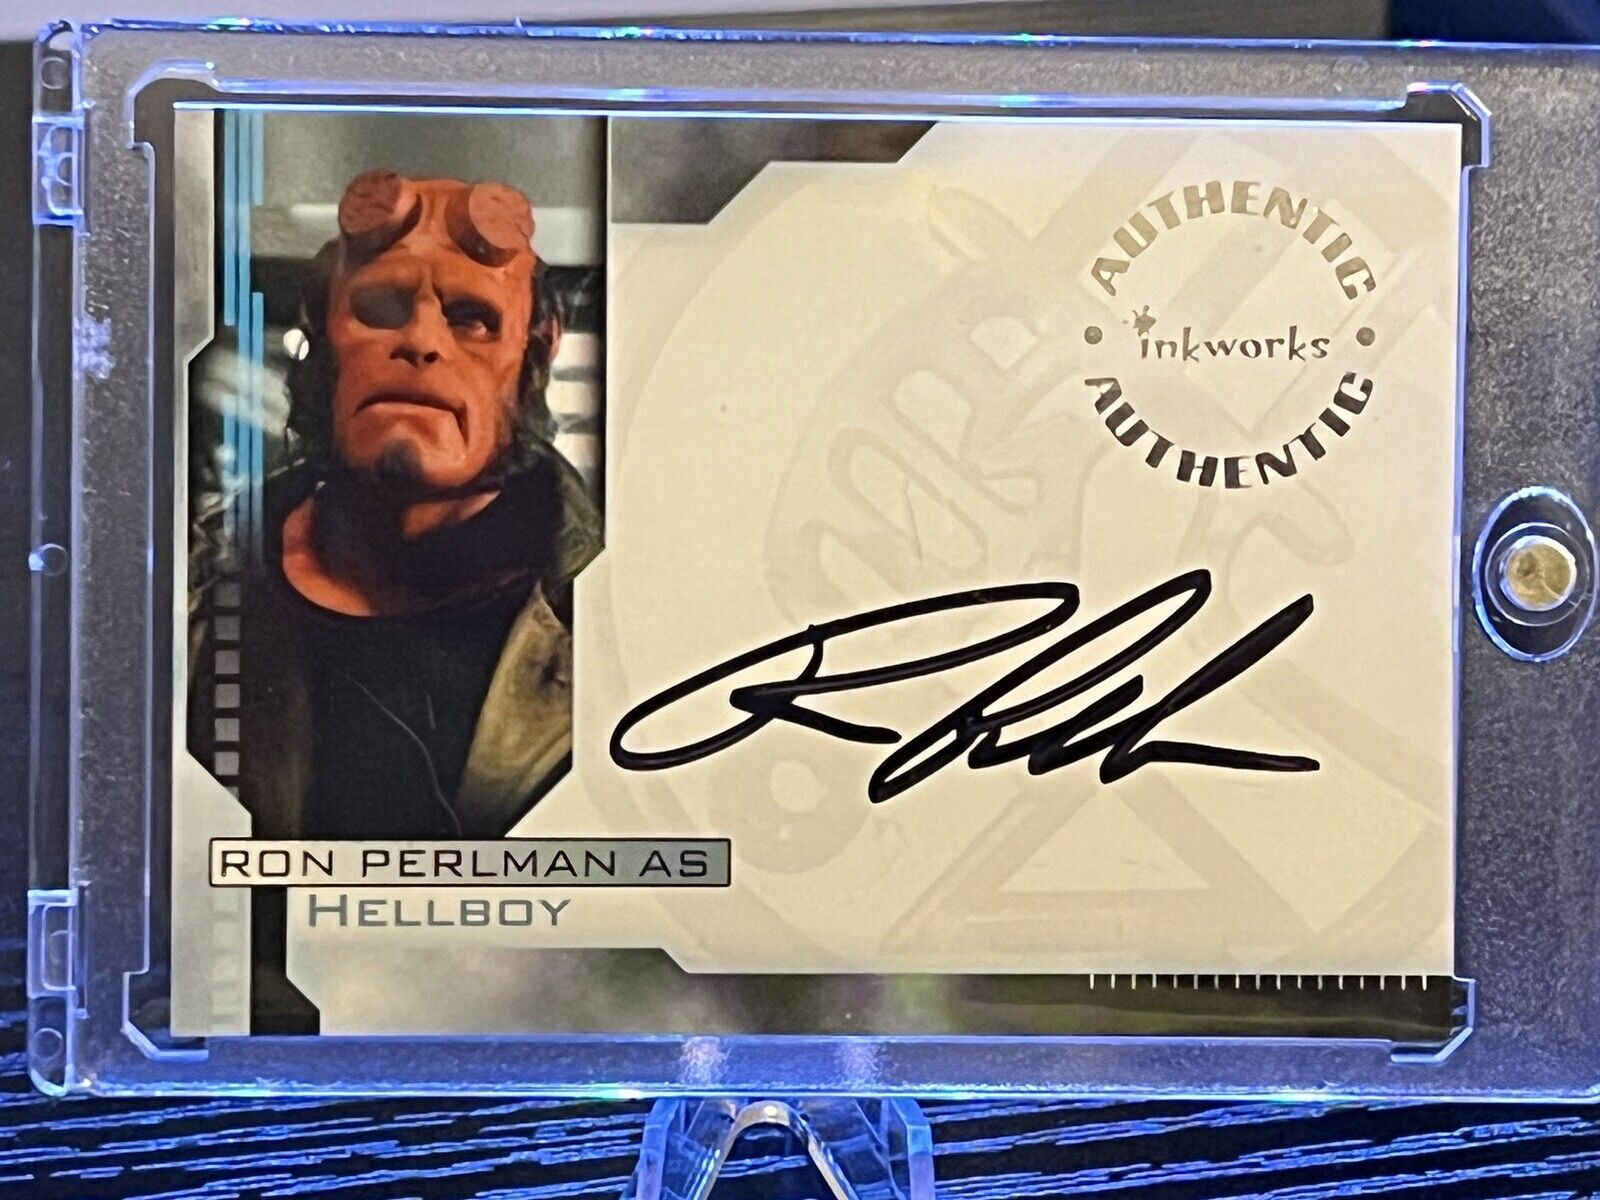 2004 Ron Perlman As Hellboy Authentic Autograph Card - Hellboy Franchise 🔥